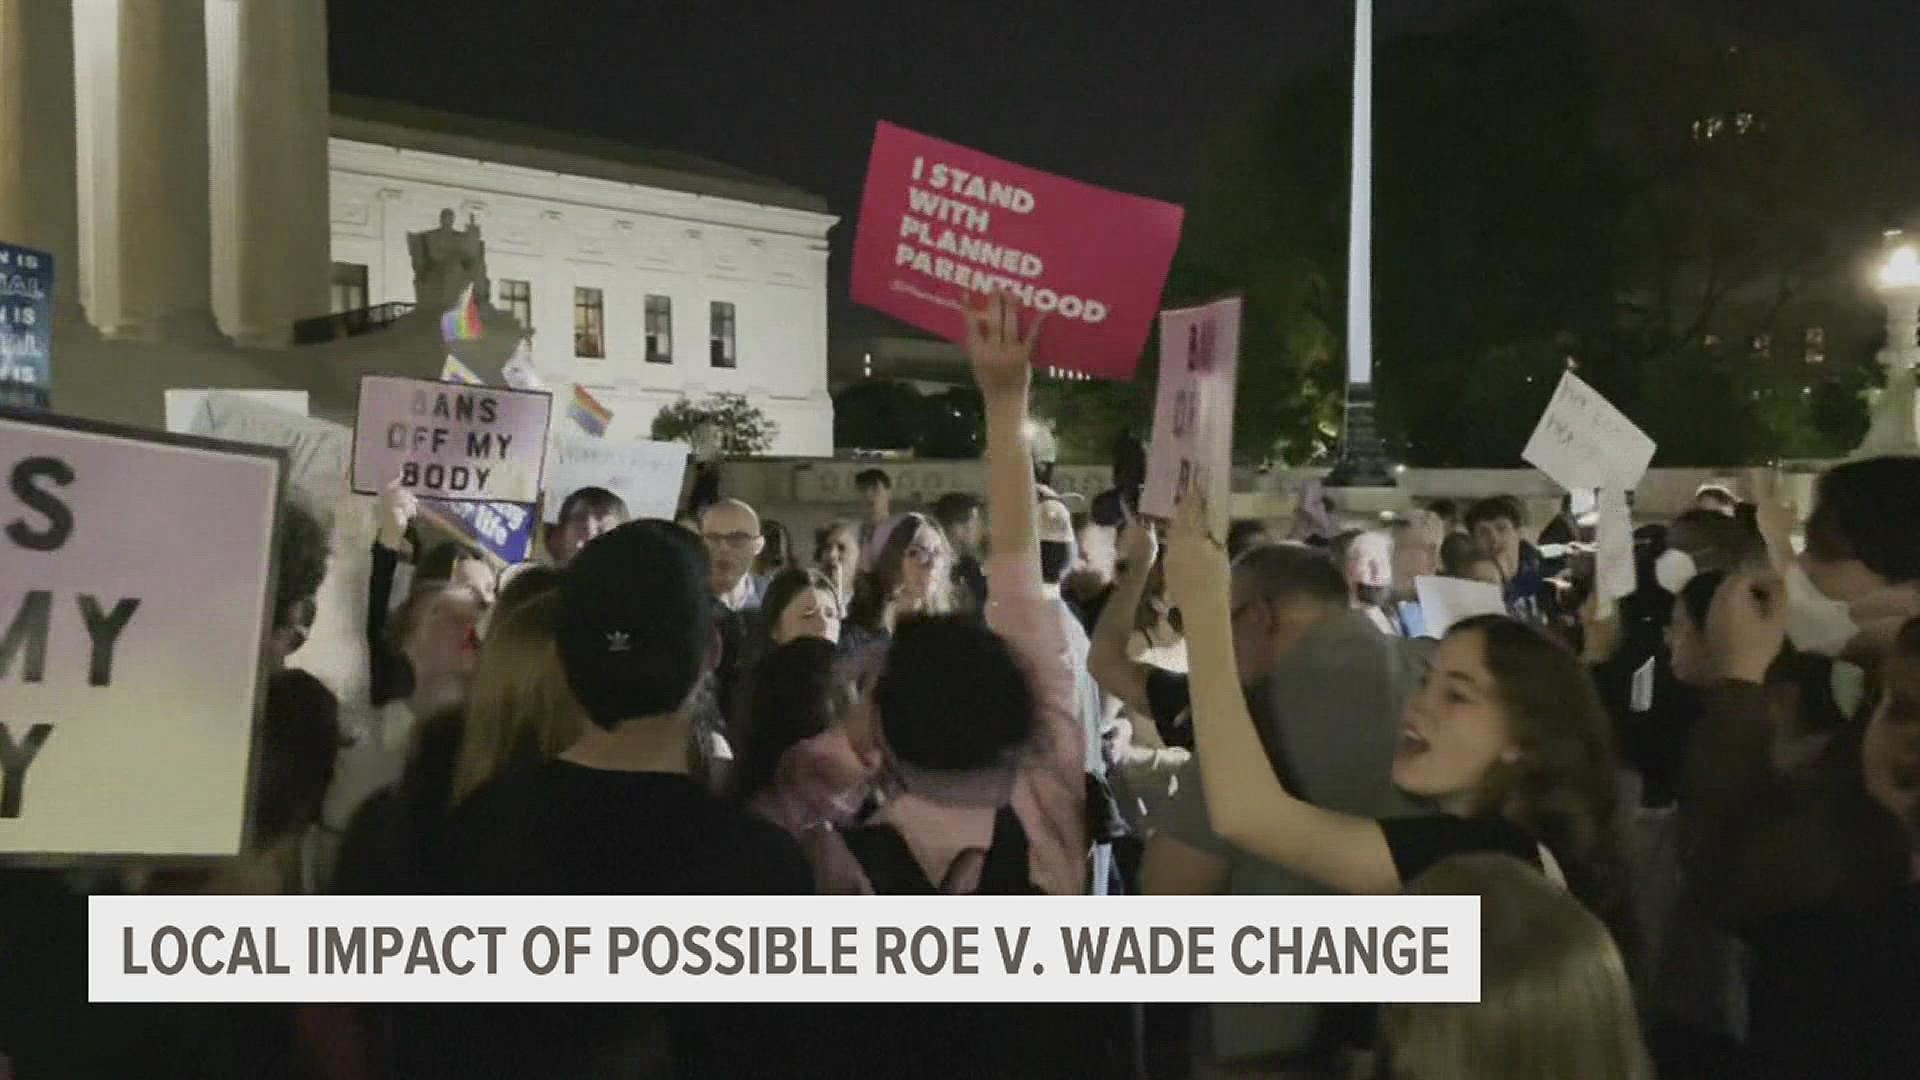 If the Supreme Court overturns Roe v. Wade, it could mean a major setback for women's abortion rights and a step forward in states with harder restrictions.